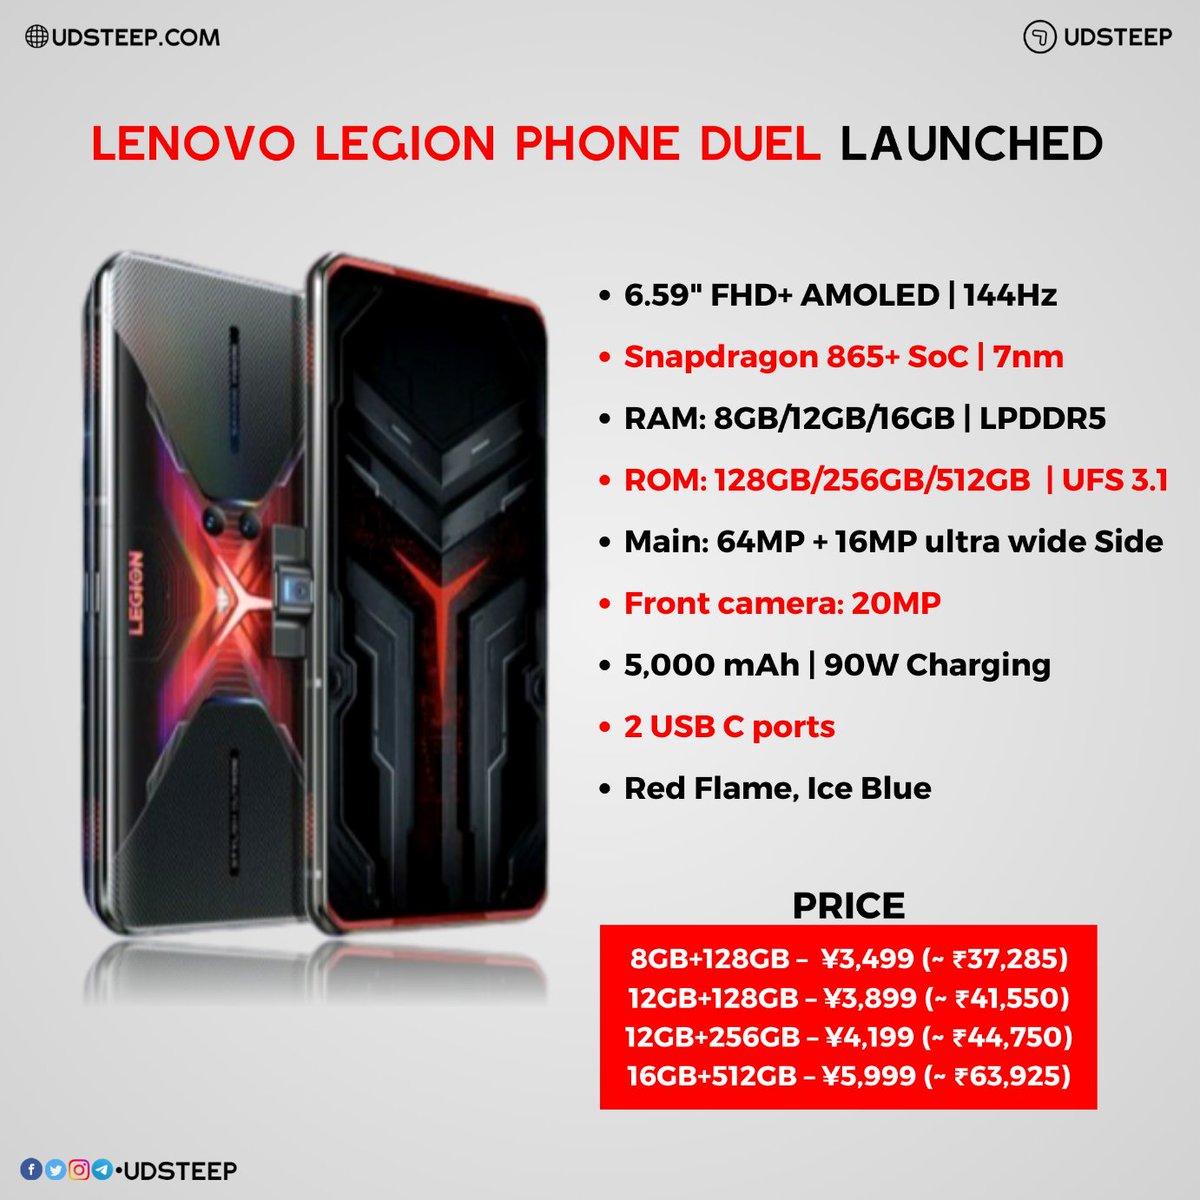 Lenovo Legion Duel with Snapdragon 865+, side pop-up selfie camera, and 90W fast charging launched in china!

There is currently no word on whether Lenovo plans to bring the Legion Phone Duel to India or not.

#LenovoLegion #LenovoIndia #Lenovo #LenovoLegionDuel #UDSTEEP